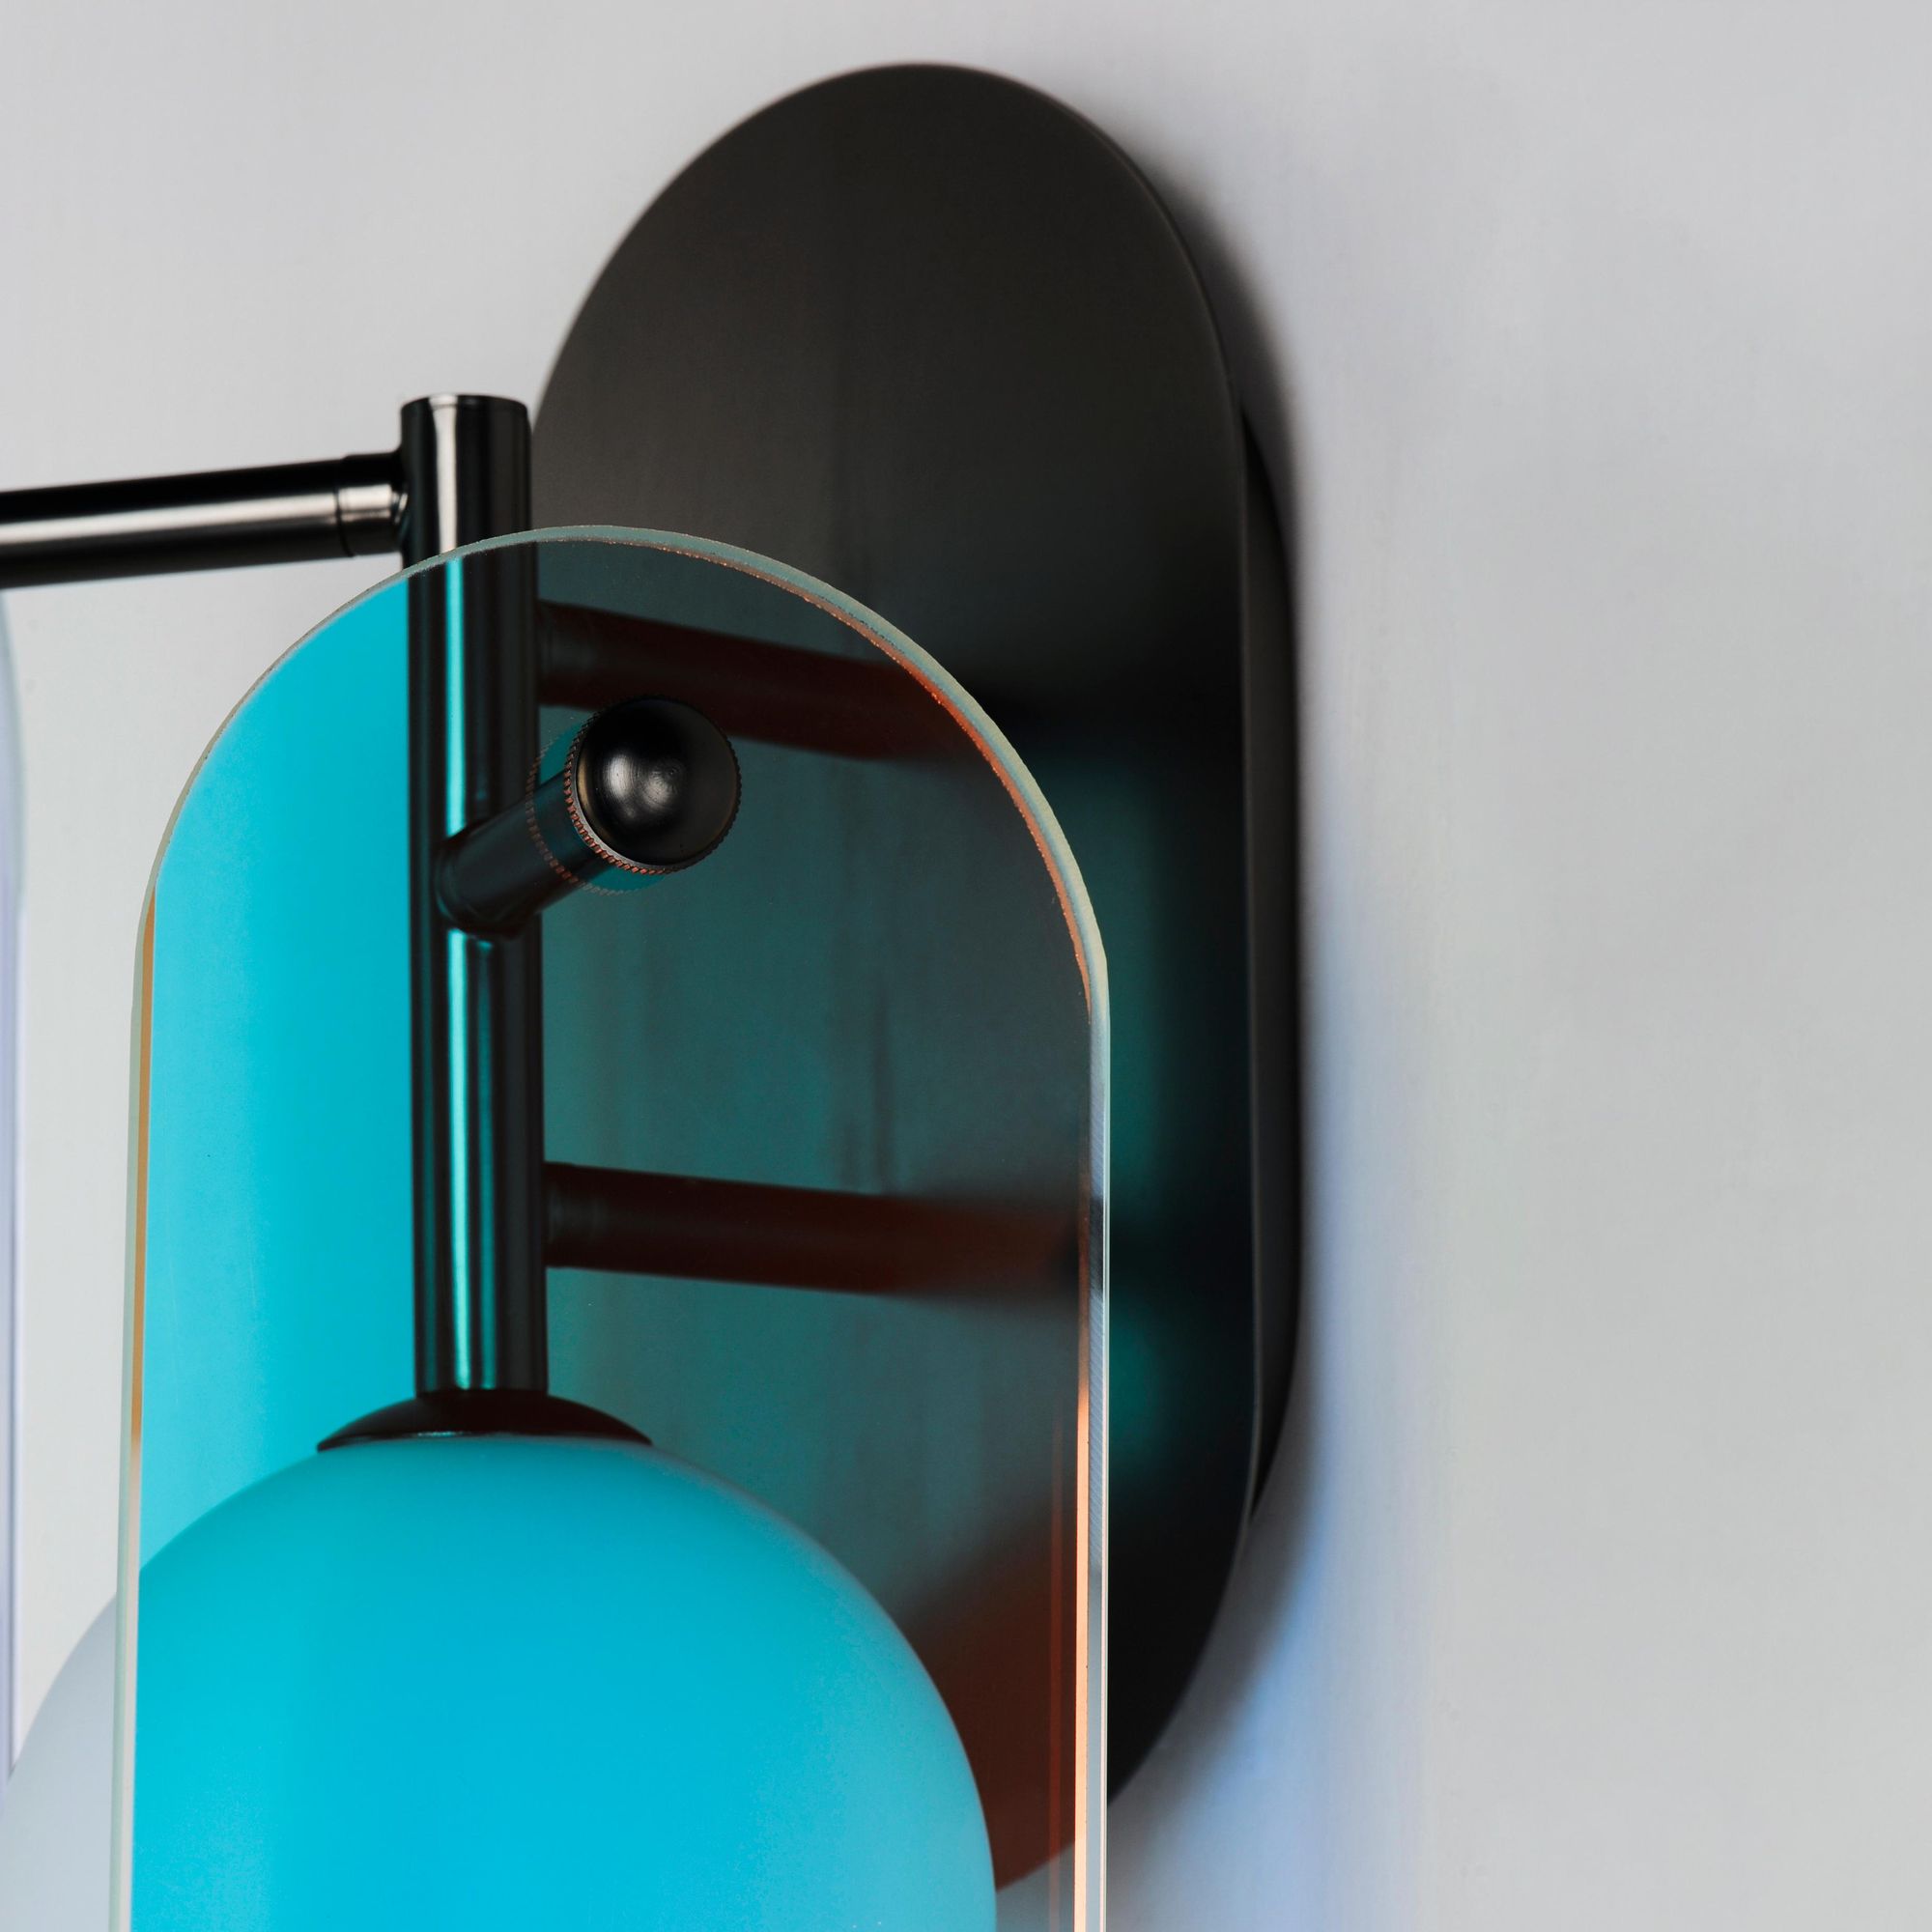 Studio M SM24810DCGM Megalith Dichroic Glass Wall Sconce in Gunmetal by Nina Magon